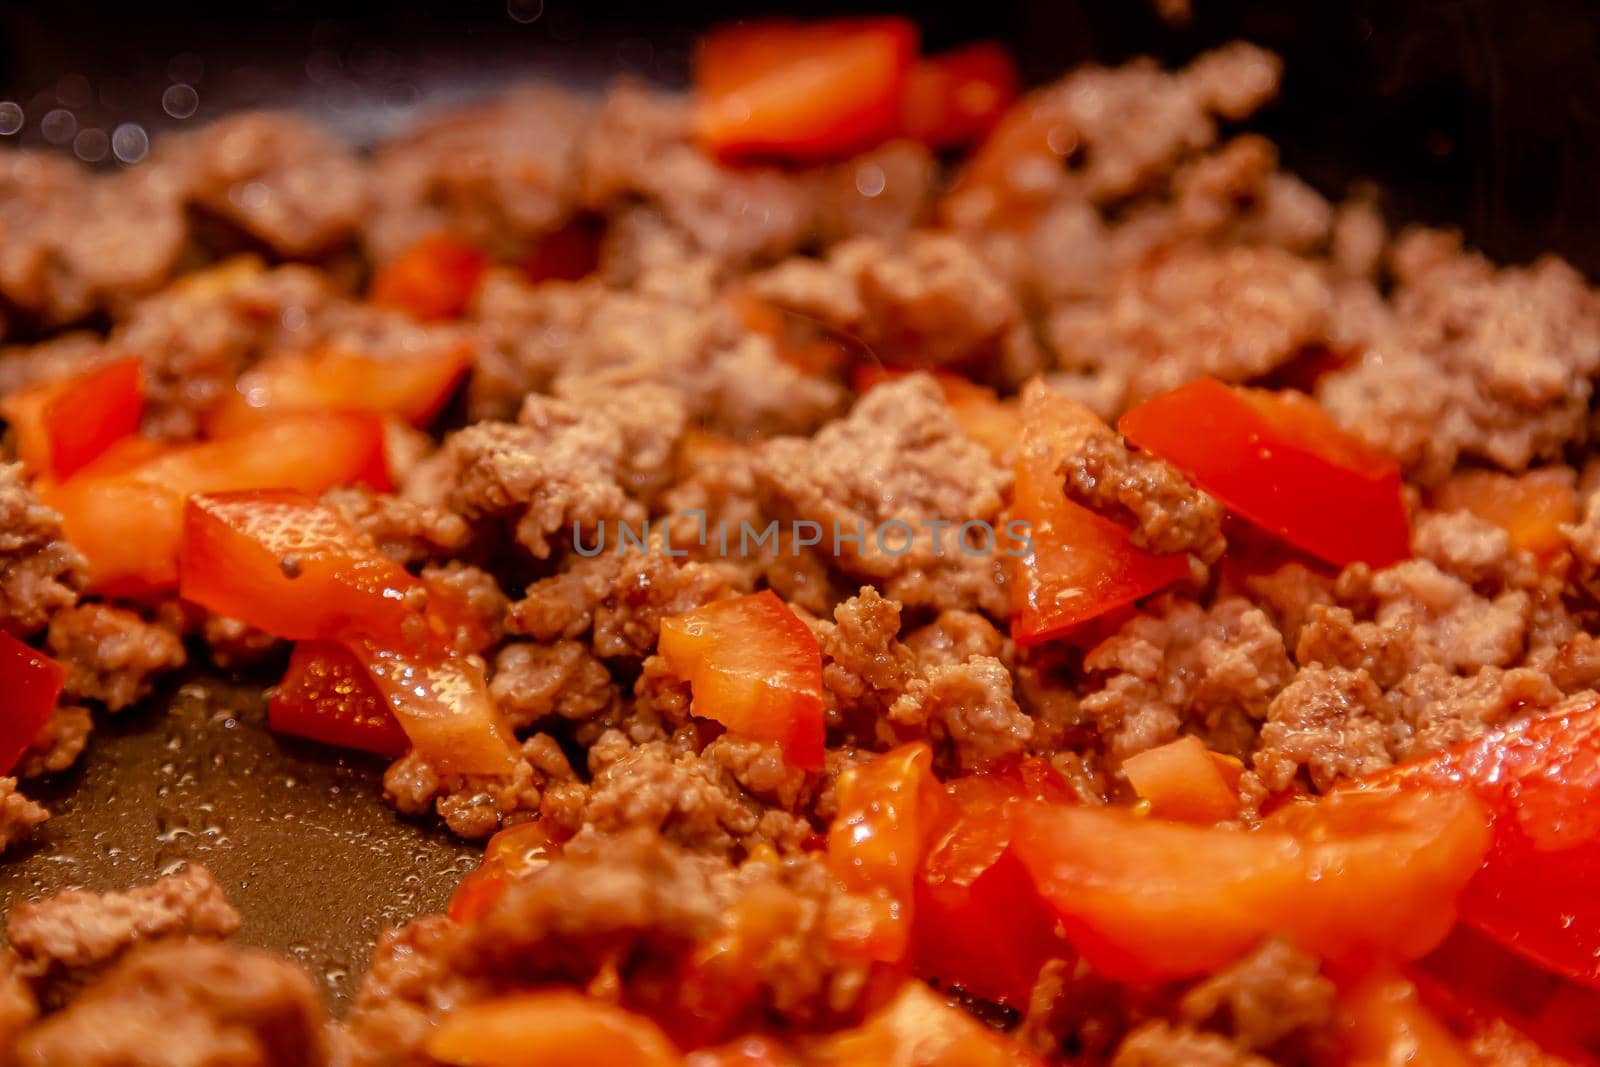 Bolognese ragout in a frying pan with wooden spoon, authentic recipe, close-up.